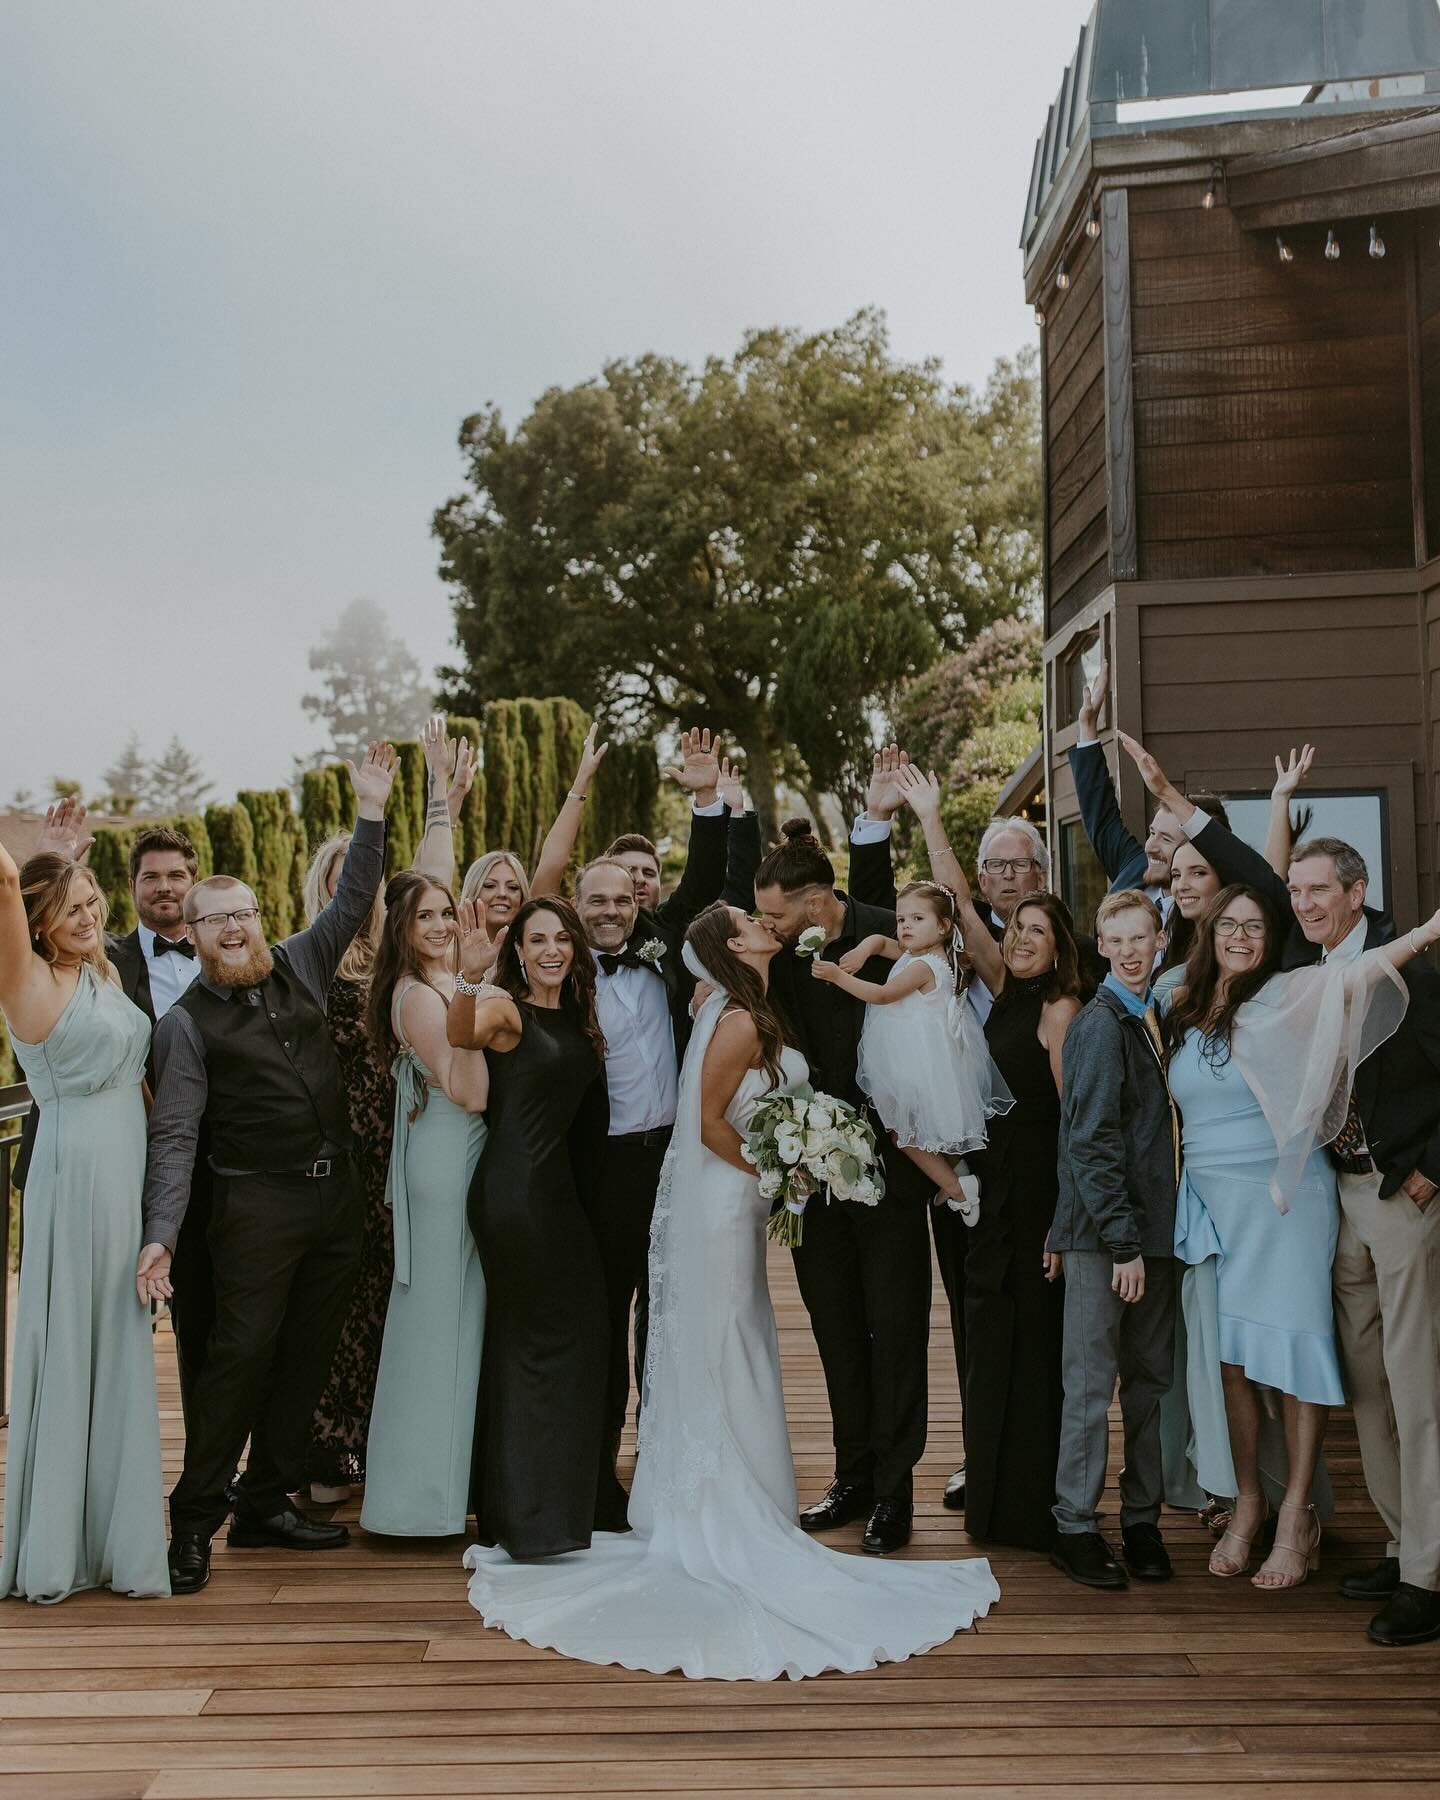 07. 07. 23 The way the sun was shining for these family photos for Nick and Alexis was amazing✨

Venue: @fogartywineryevents 
Photo: @codibaerphotography 
Planner: @120events 
Florist: @heavenlyblossomsflorist 
Hair\Makeup: @beautybyxiomara 
Dress: @